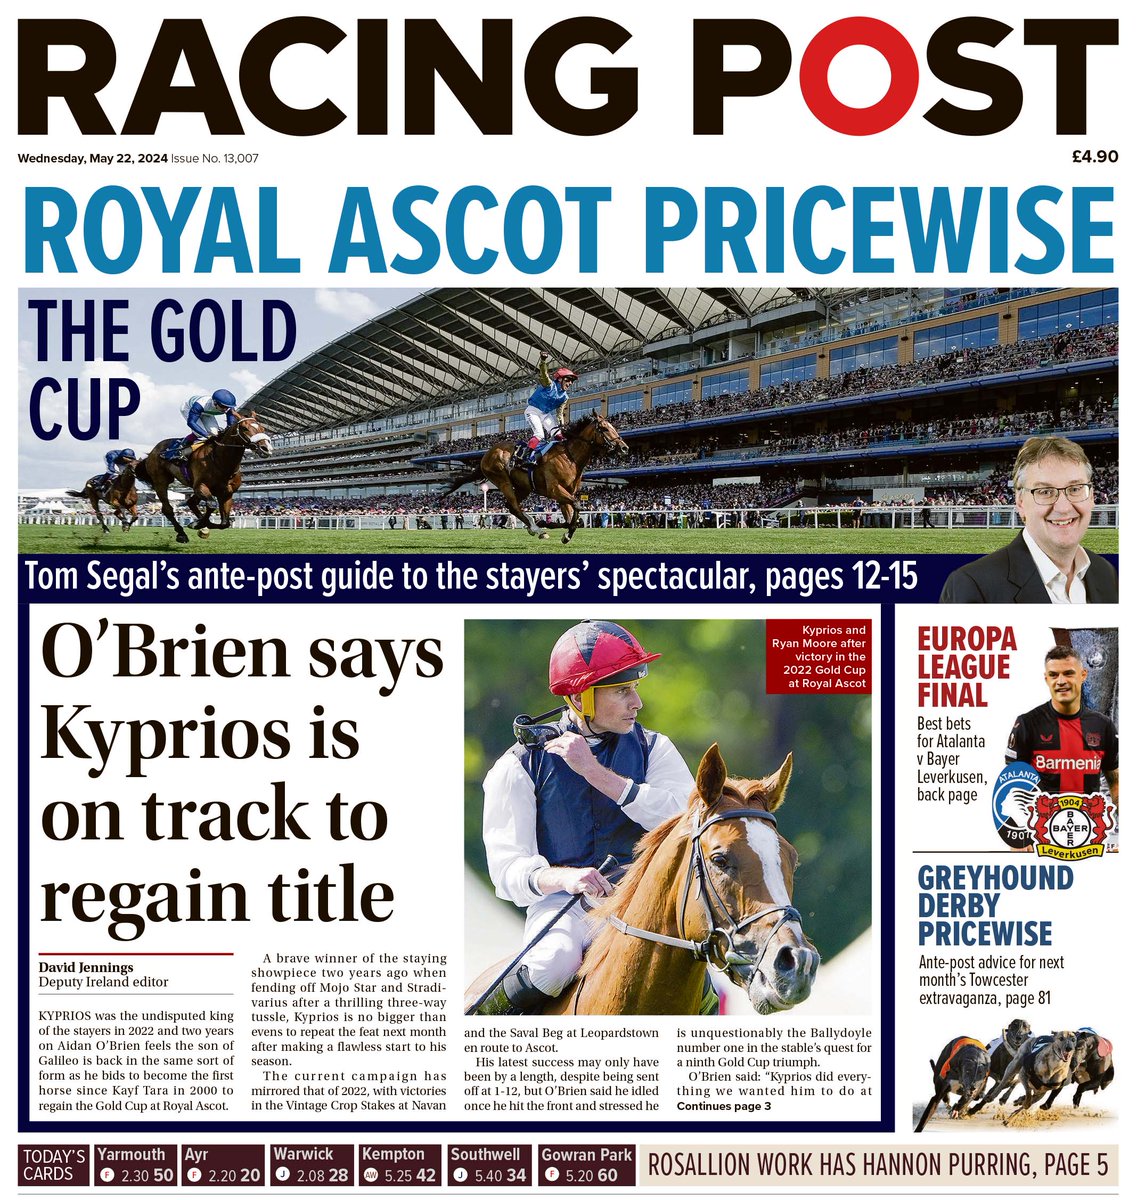 In tomorrow's @RacingPost: Aidan O'Brien provides an update on star stayer Kyprios as Tom Segal gives his Pricewise verdict on the race, plus insight from Epsom's gallops morning and the latest on 2,000 Guineas runner-up Rosallion and juvenile star Vandeek